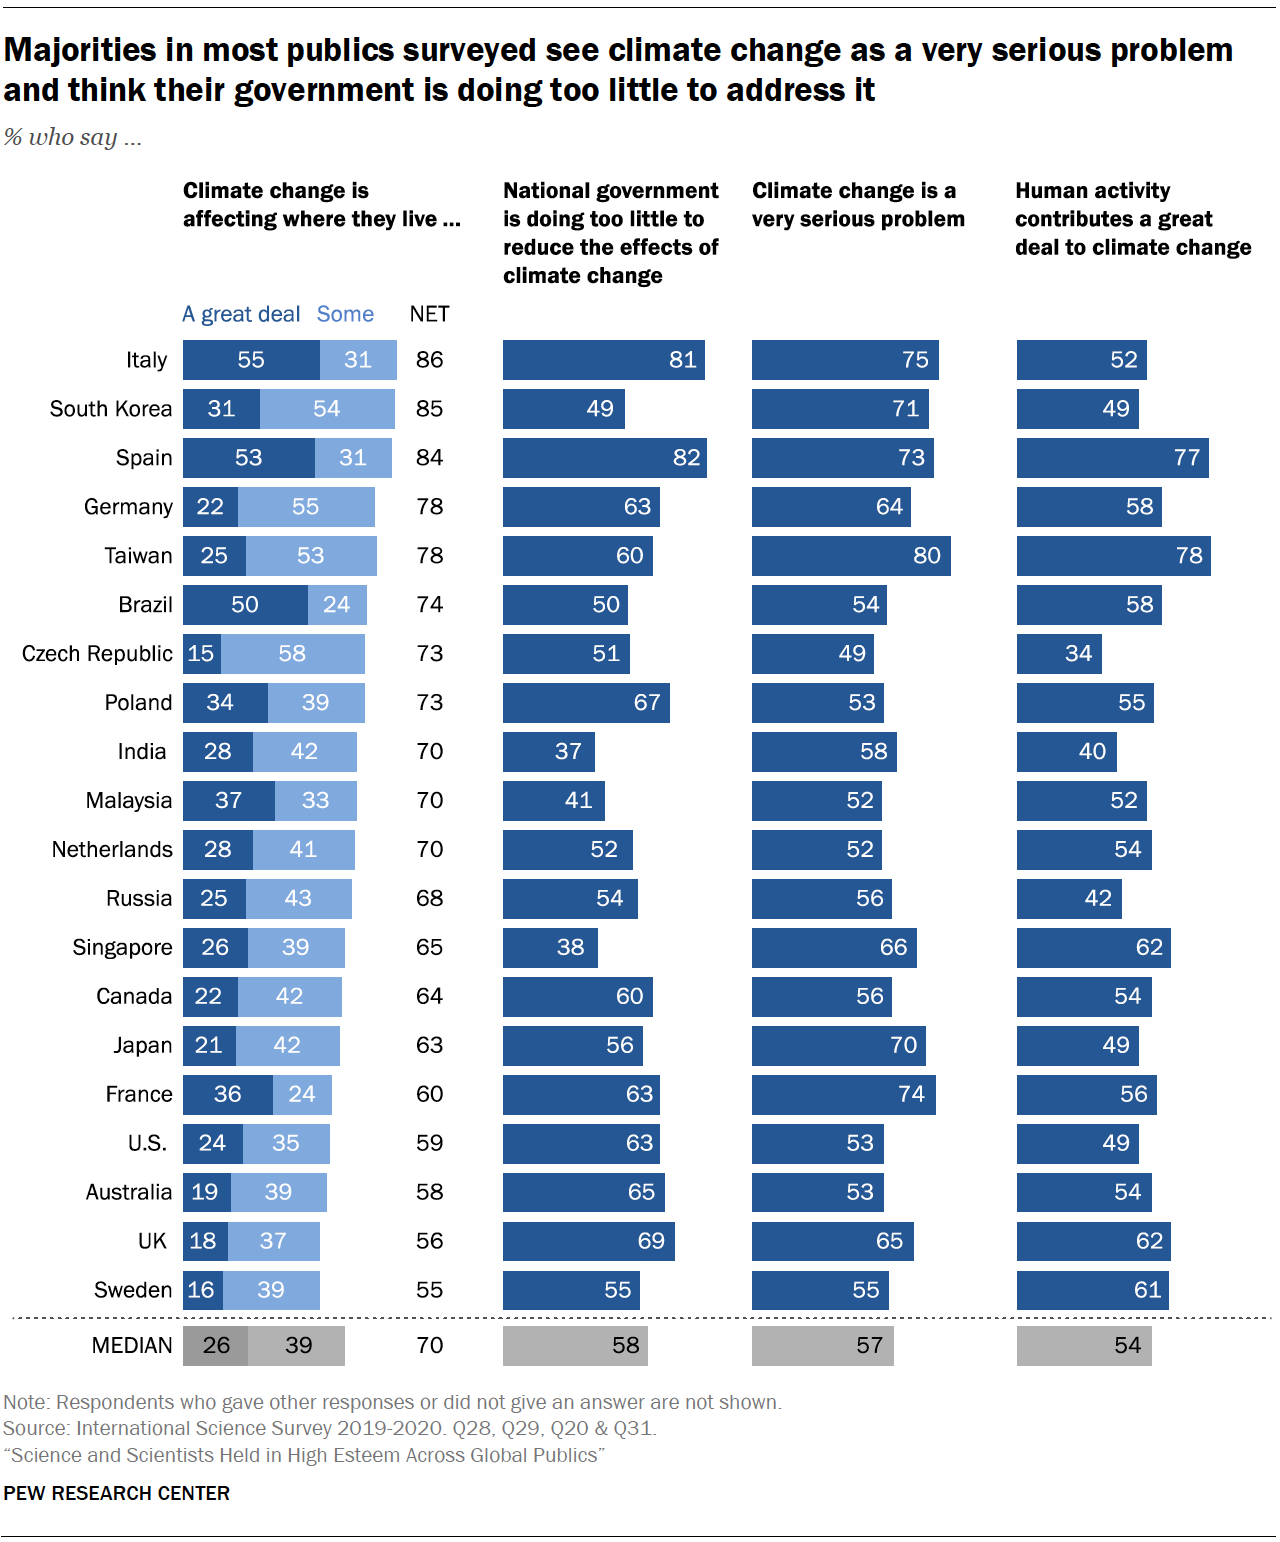 Chart shows majorities in most publics surveyed see climate change as a very serious problem and think their government is doing too little to address it